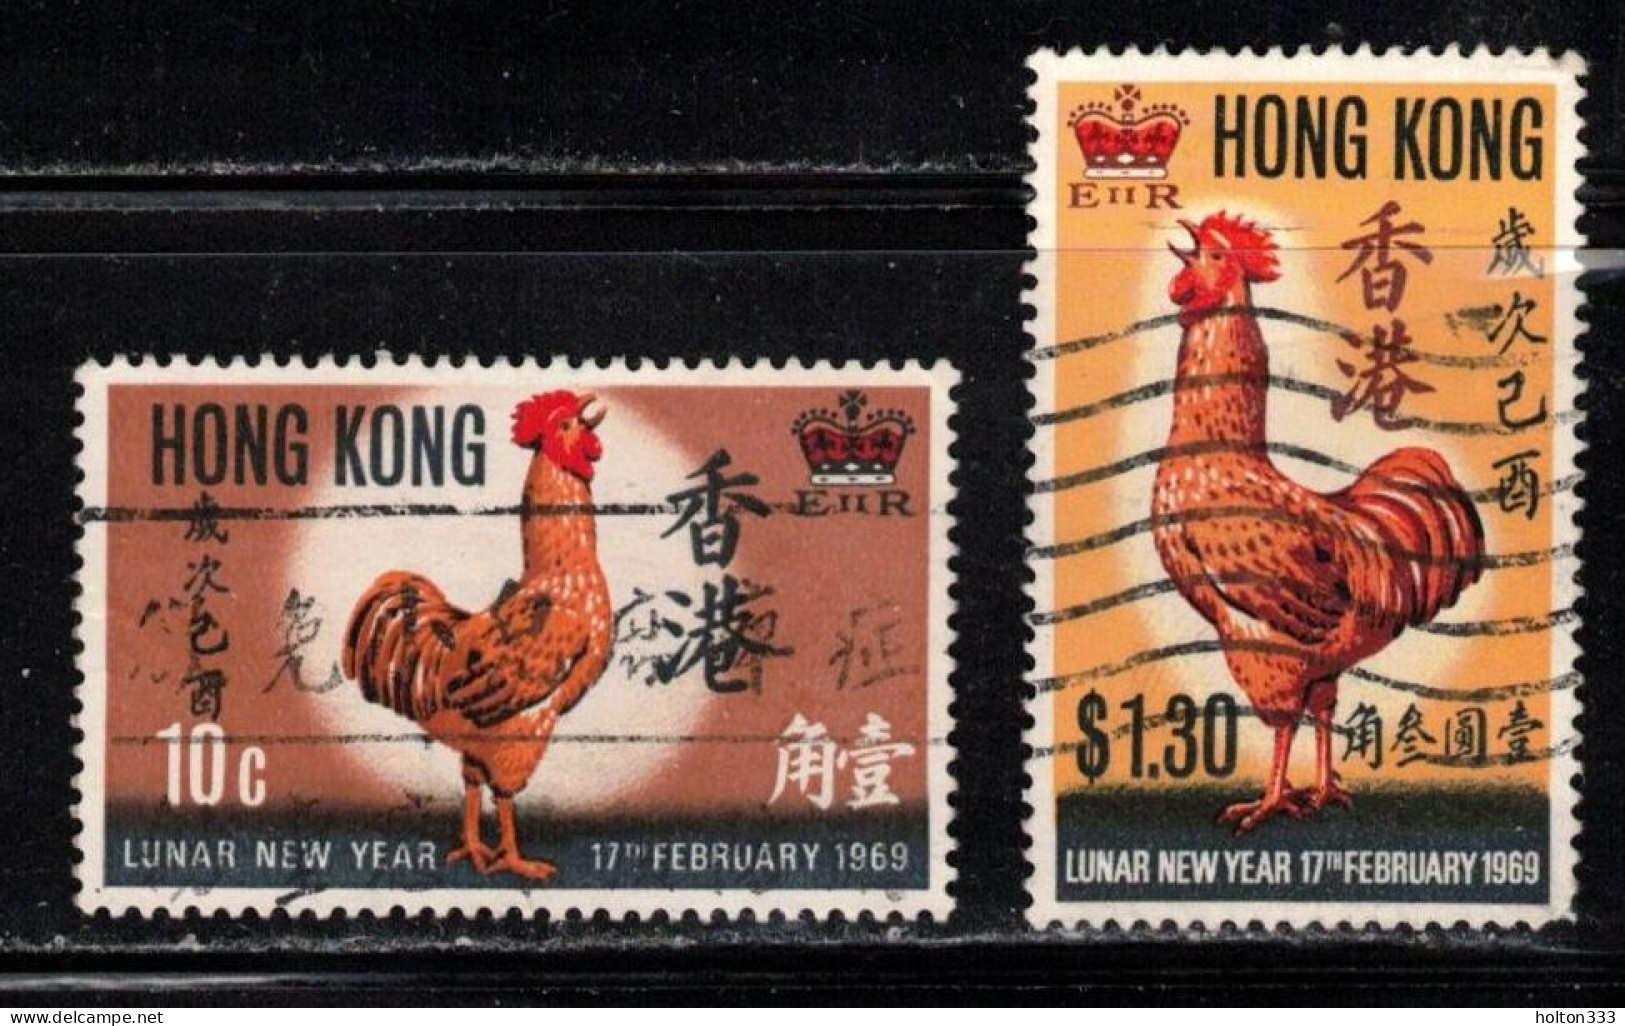 HONG KONG Scott # 249-50 Used - Lunar New Year 1969 - Used Stamps